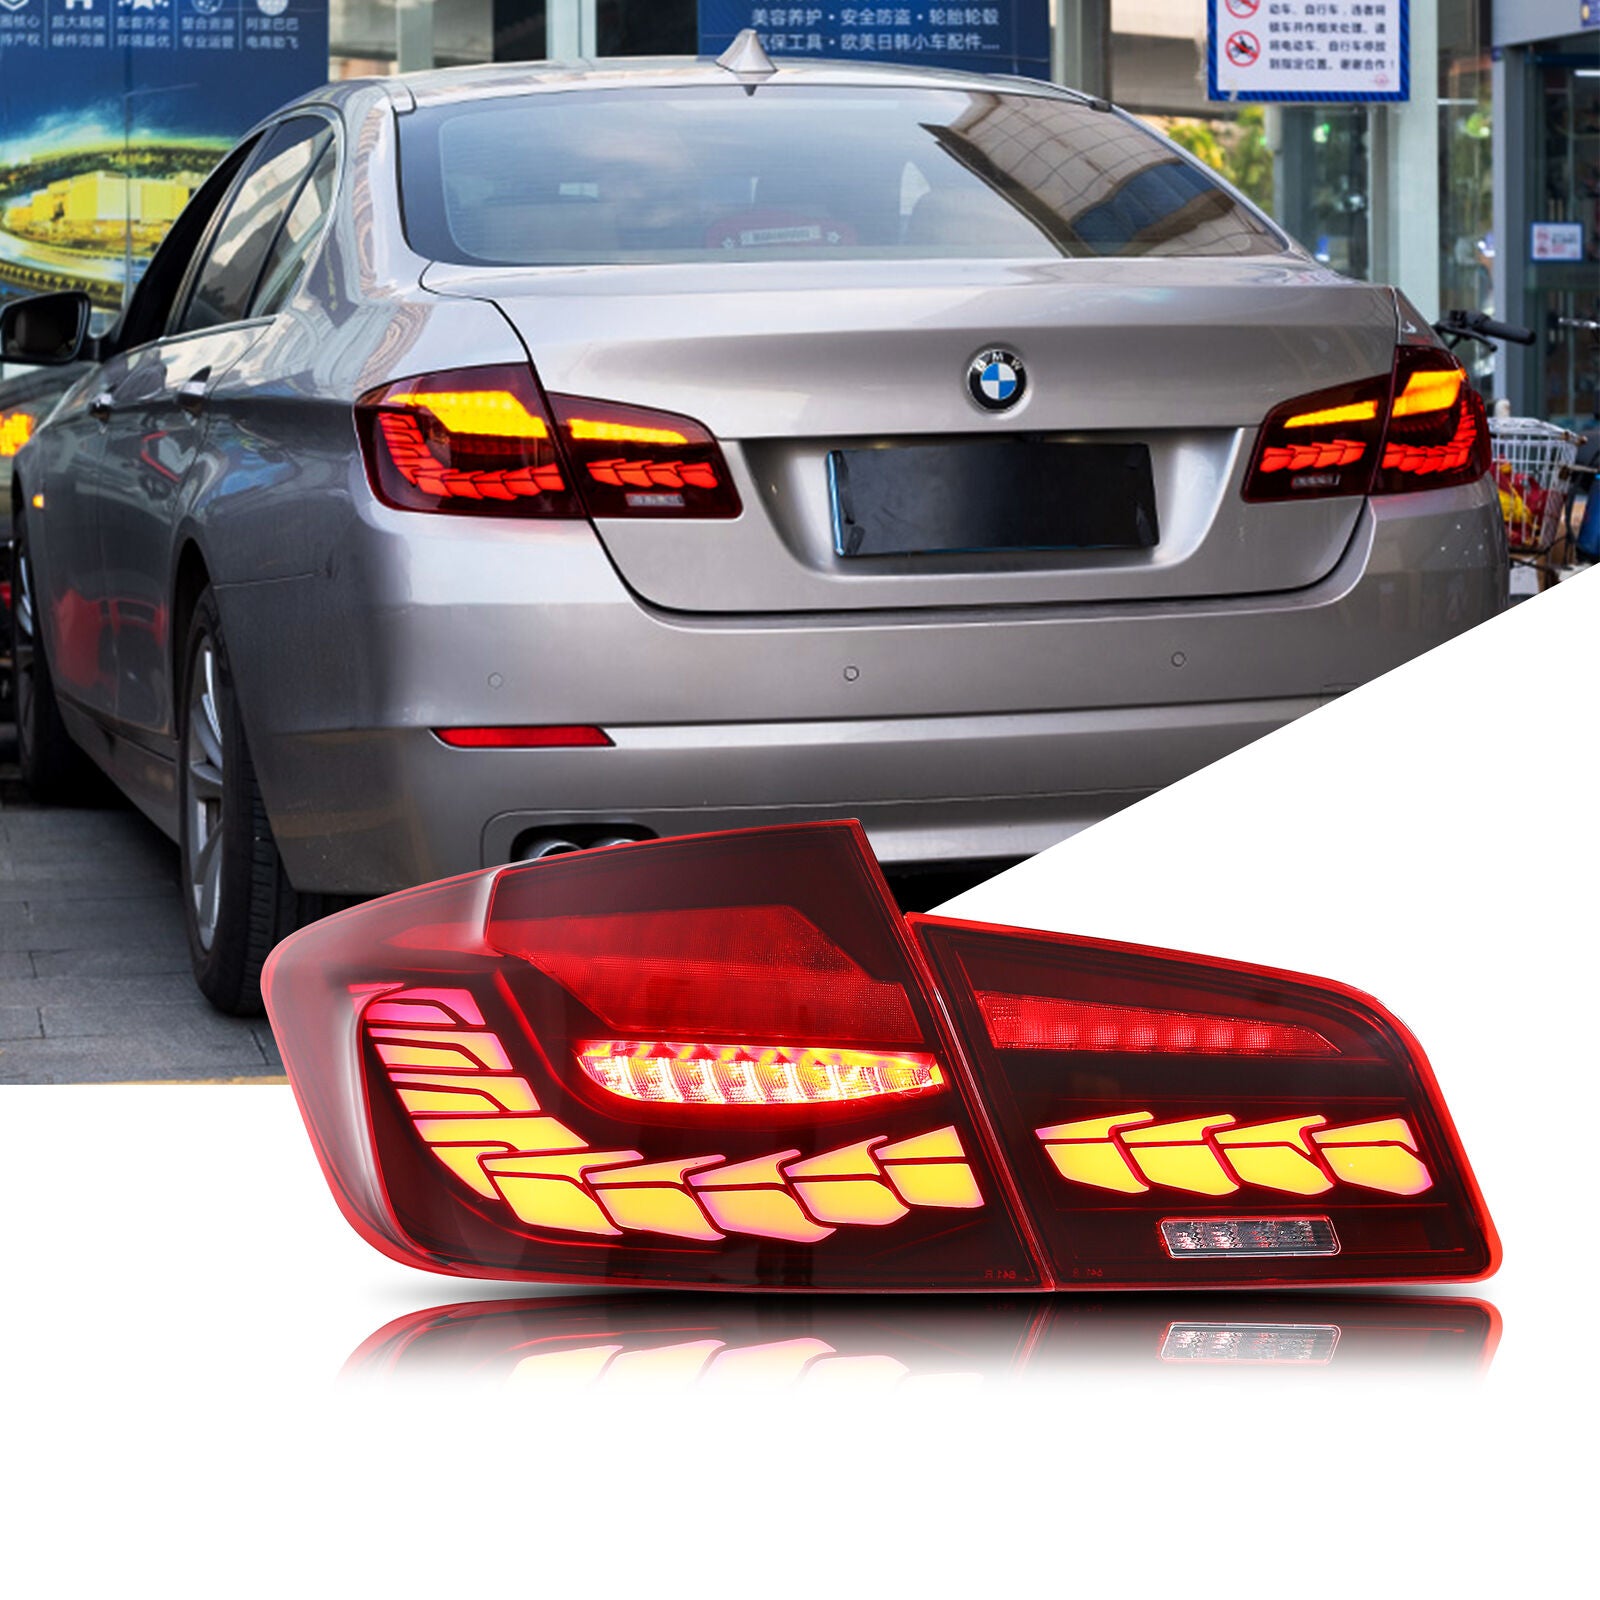 inginuity time LED GTS Tail Lights for BMW Series 5 F10 F18 2011-2017 Start  Up Animation Sequential Indicator Rear Lamp Assembly